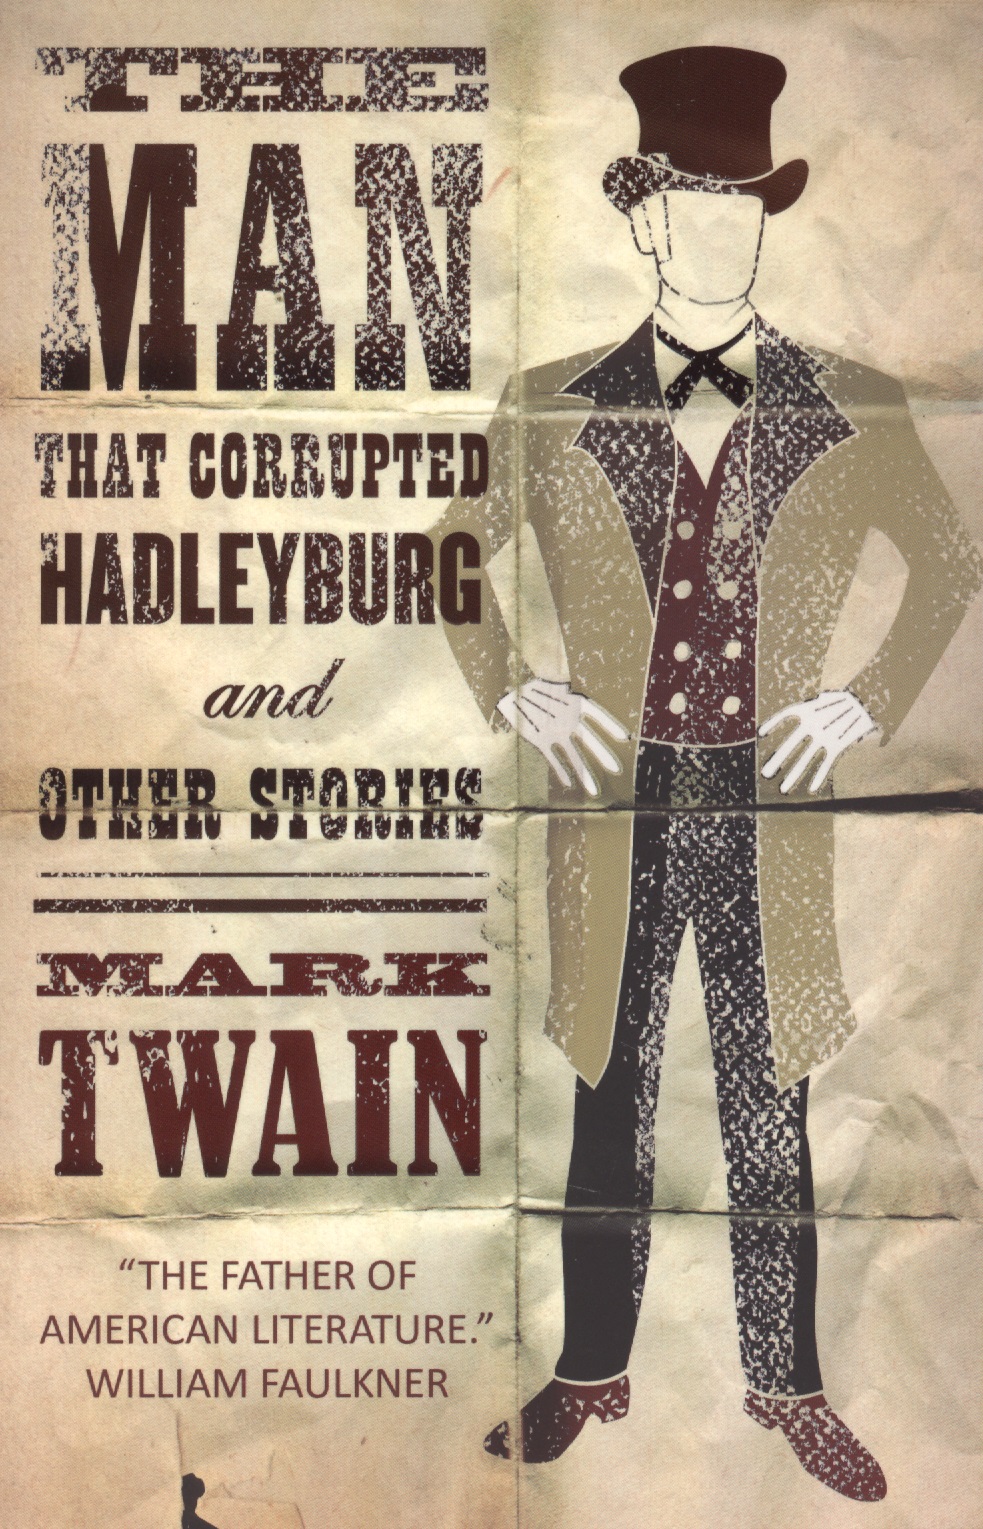 twain mark твен марк the $30 000 bequest and other stories Twain Mark, Твен Марк The Man That Corrupted Hadleyburg and Other Stories 